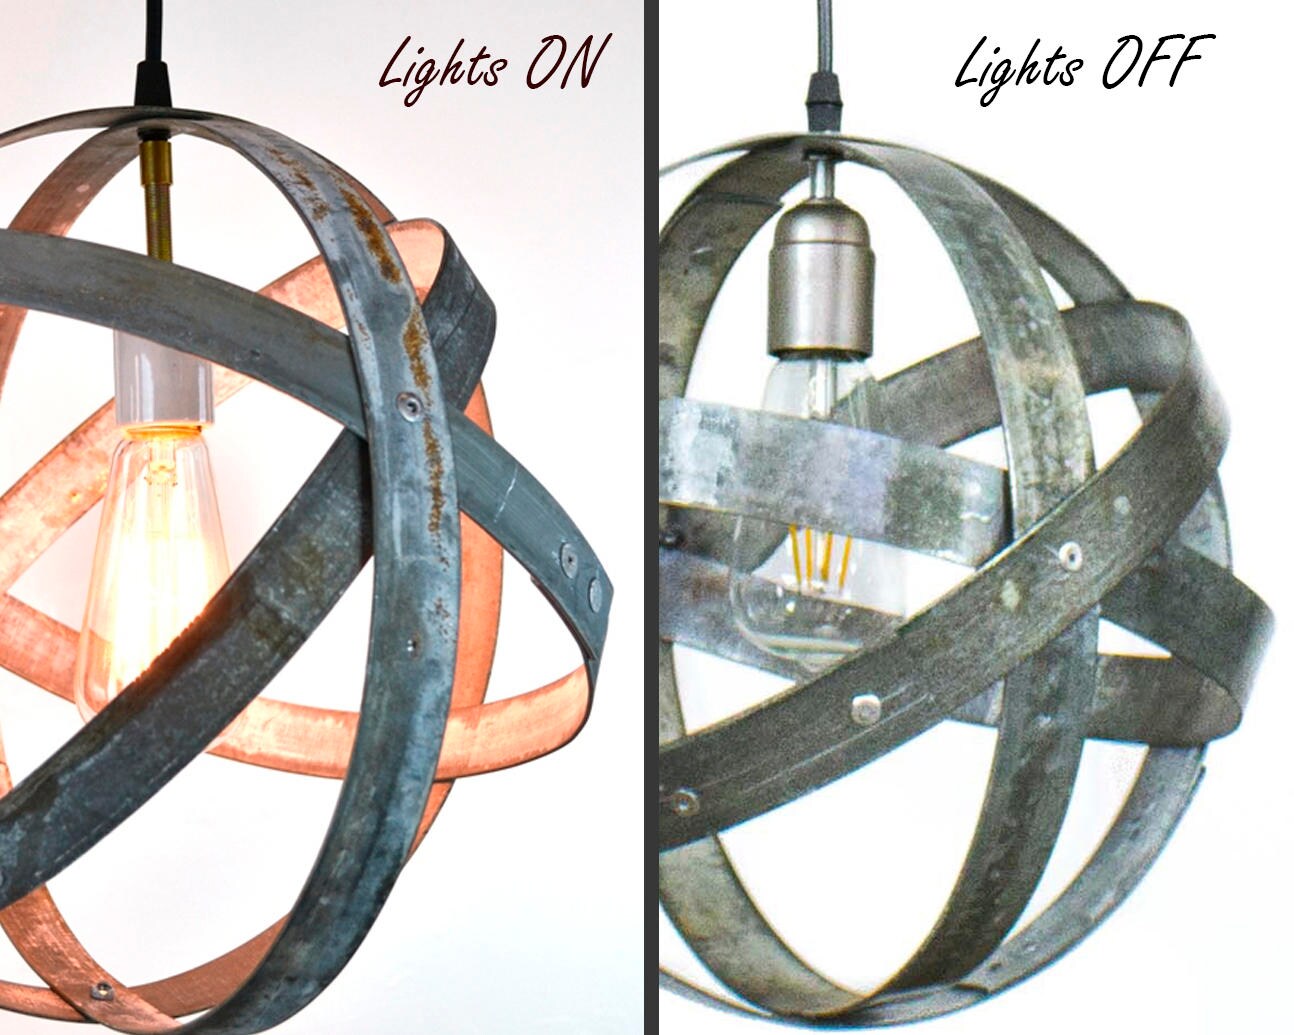 Wine Barrel Double Ring Chandelier - Cyclopean - Made from retired CA wine barrel rings. 100% Recycled!